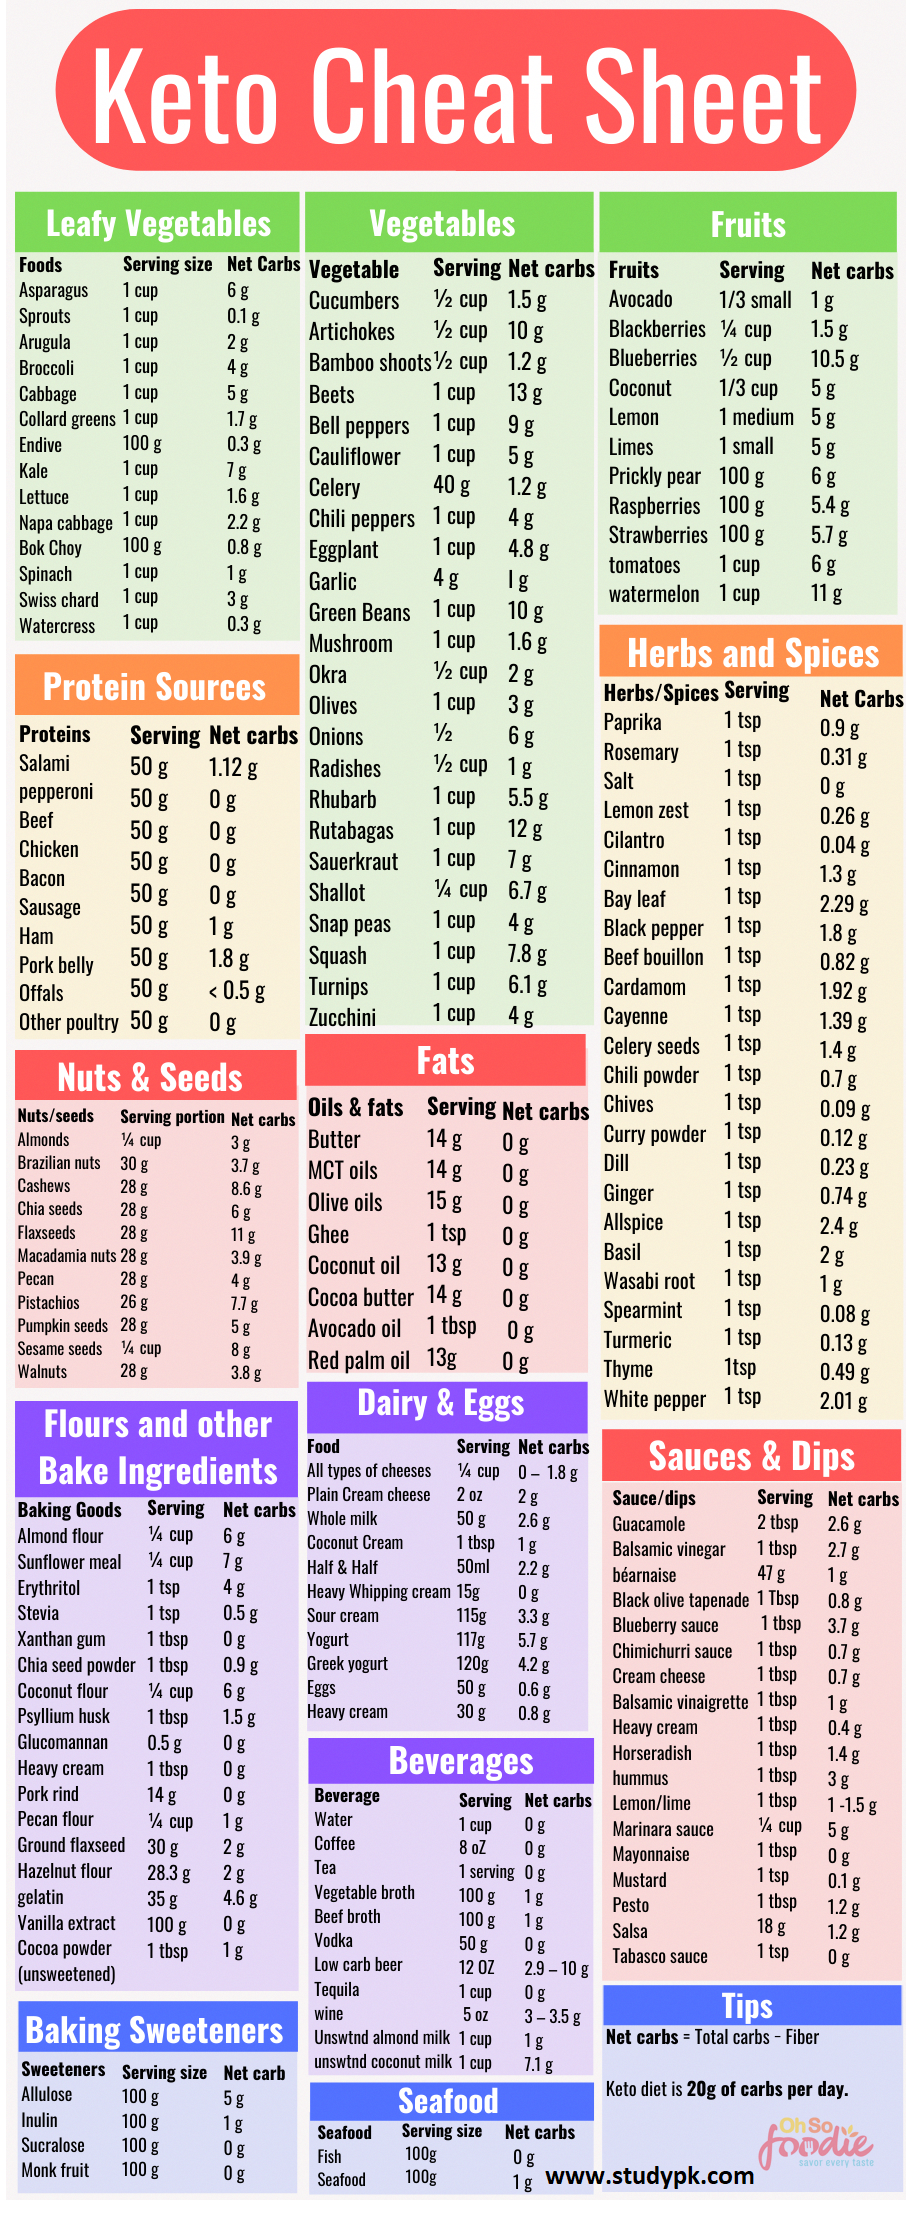 Keto List of Foods and Serving Size